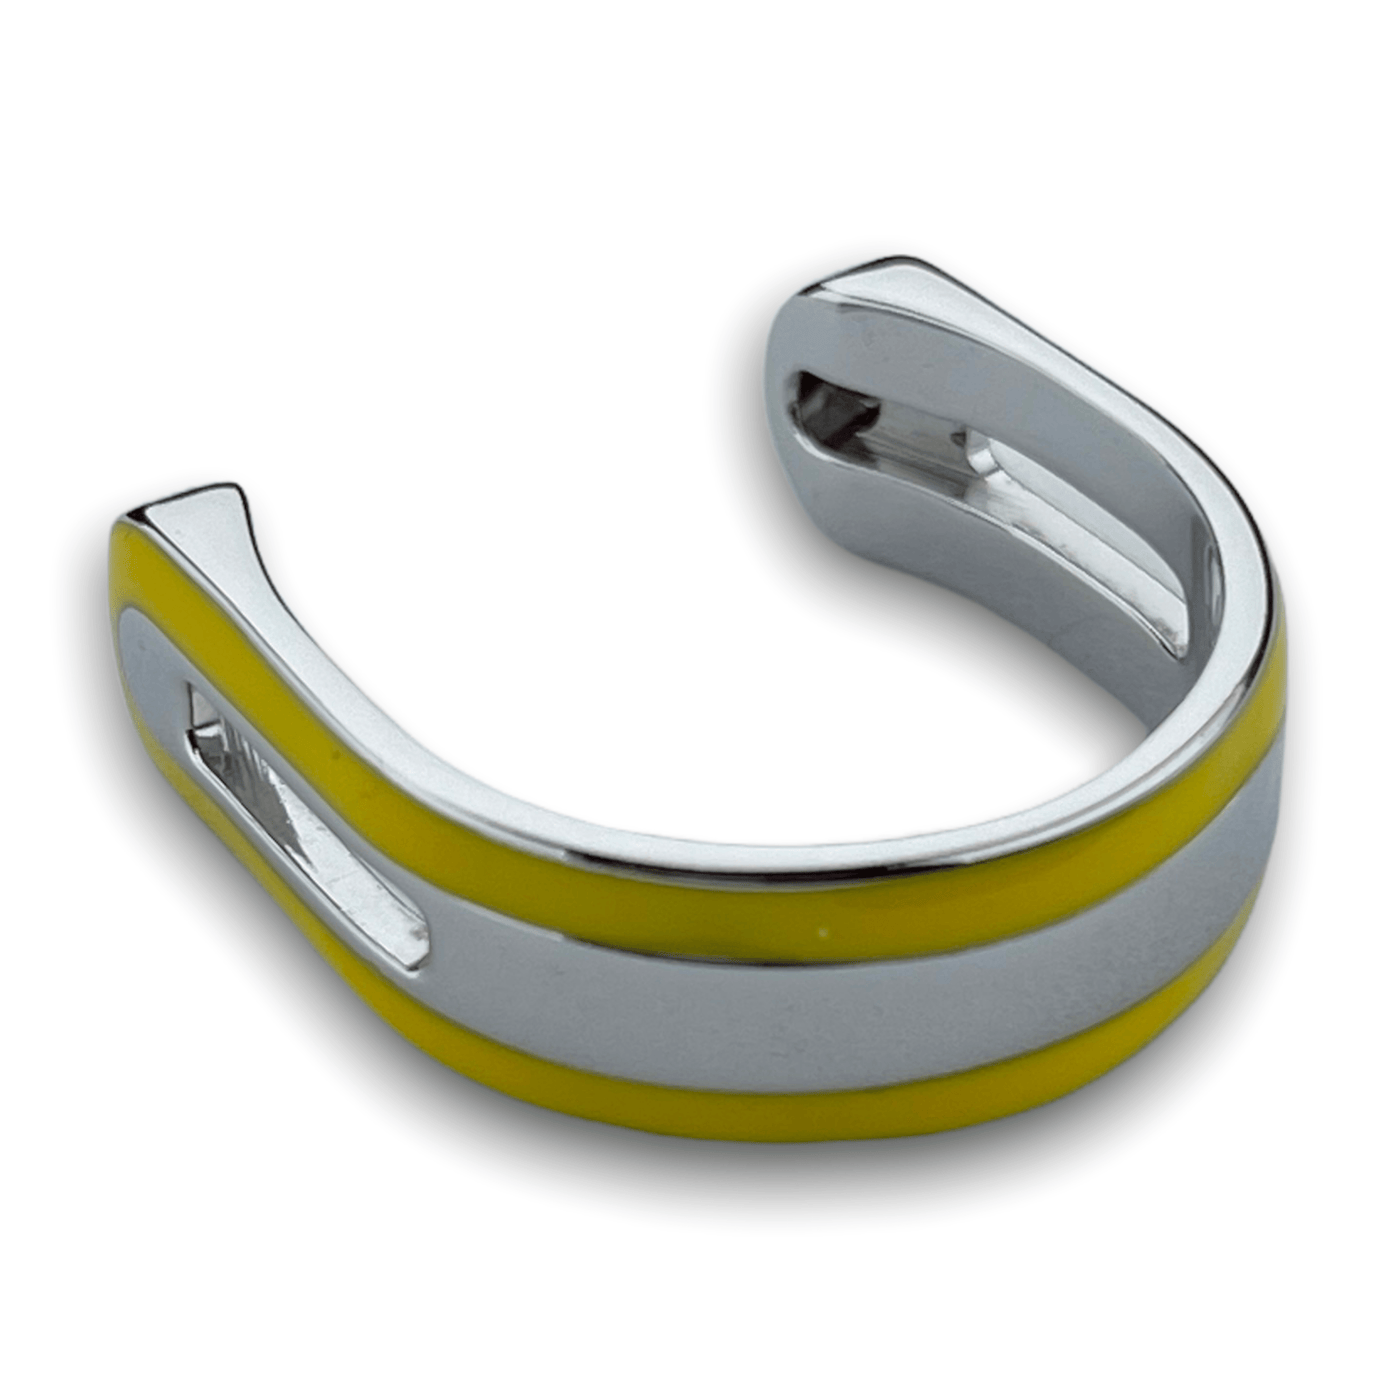 Chroma Ring Band - choose from 5 colors